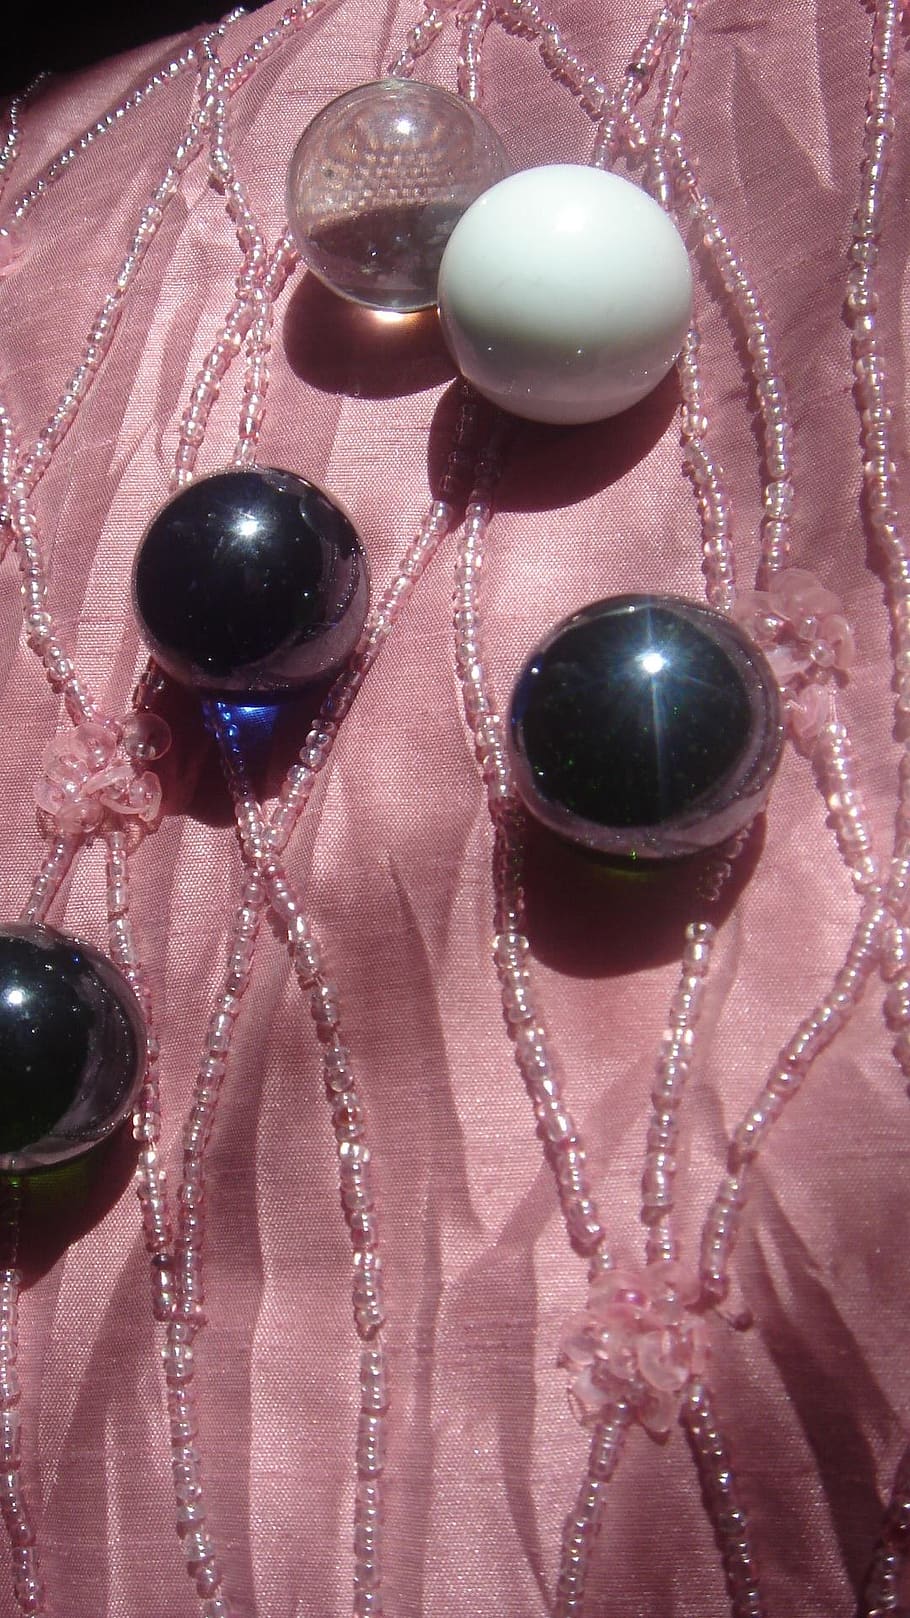 balls, glass, light, pink, beads, impression, necklace, jewelry, fashion, indoors